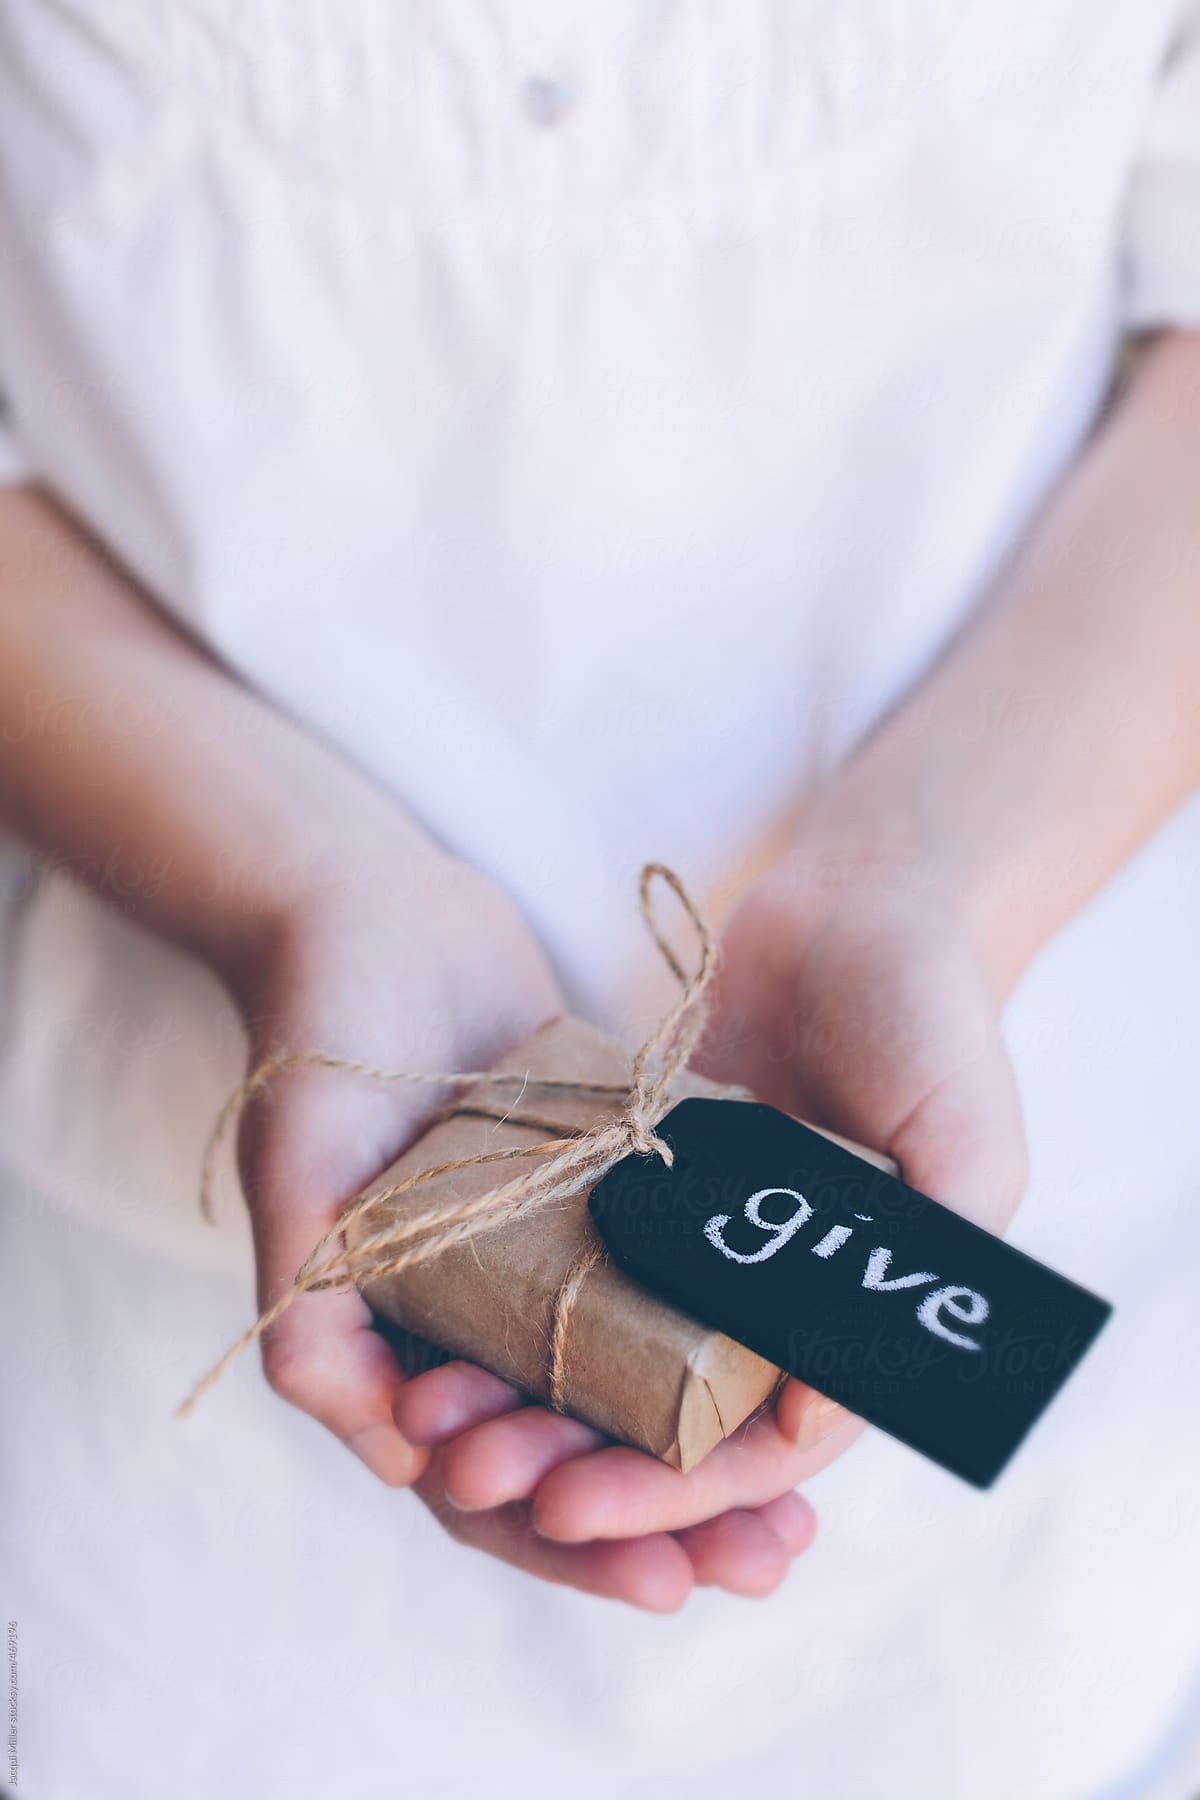 Girls hands holding a gift with the word \'give\' written on a black slate tag